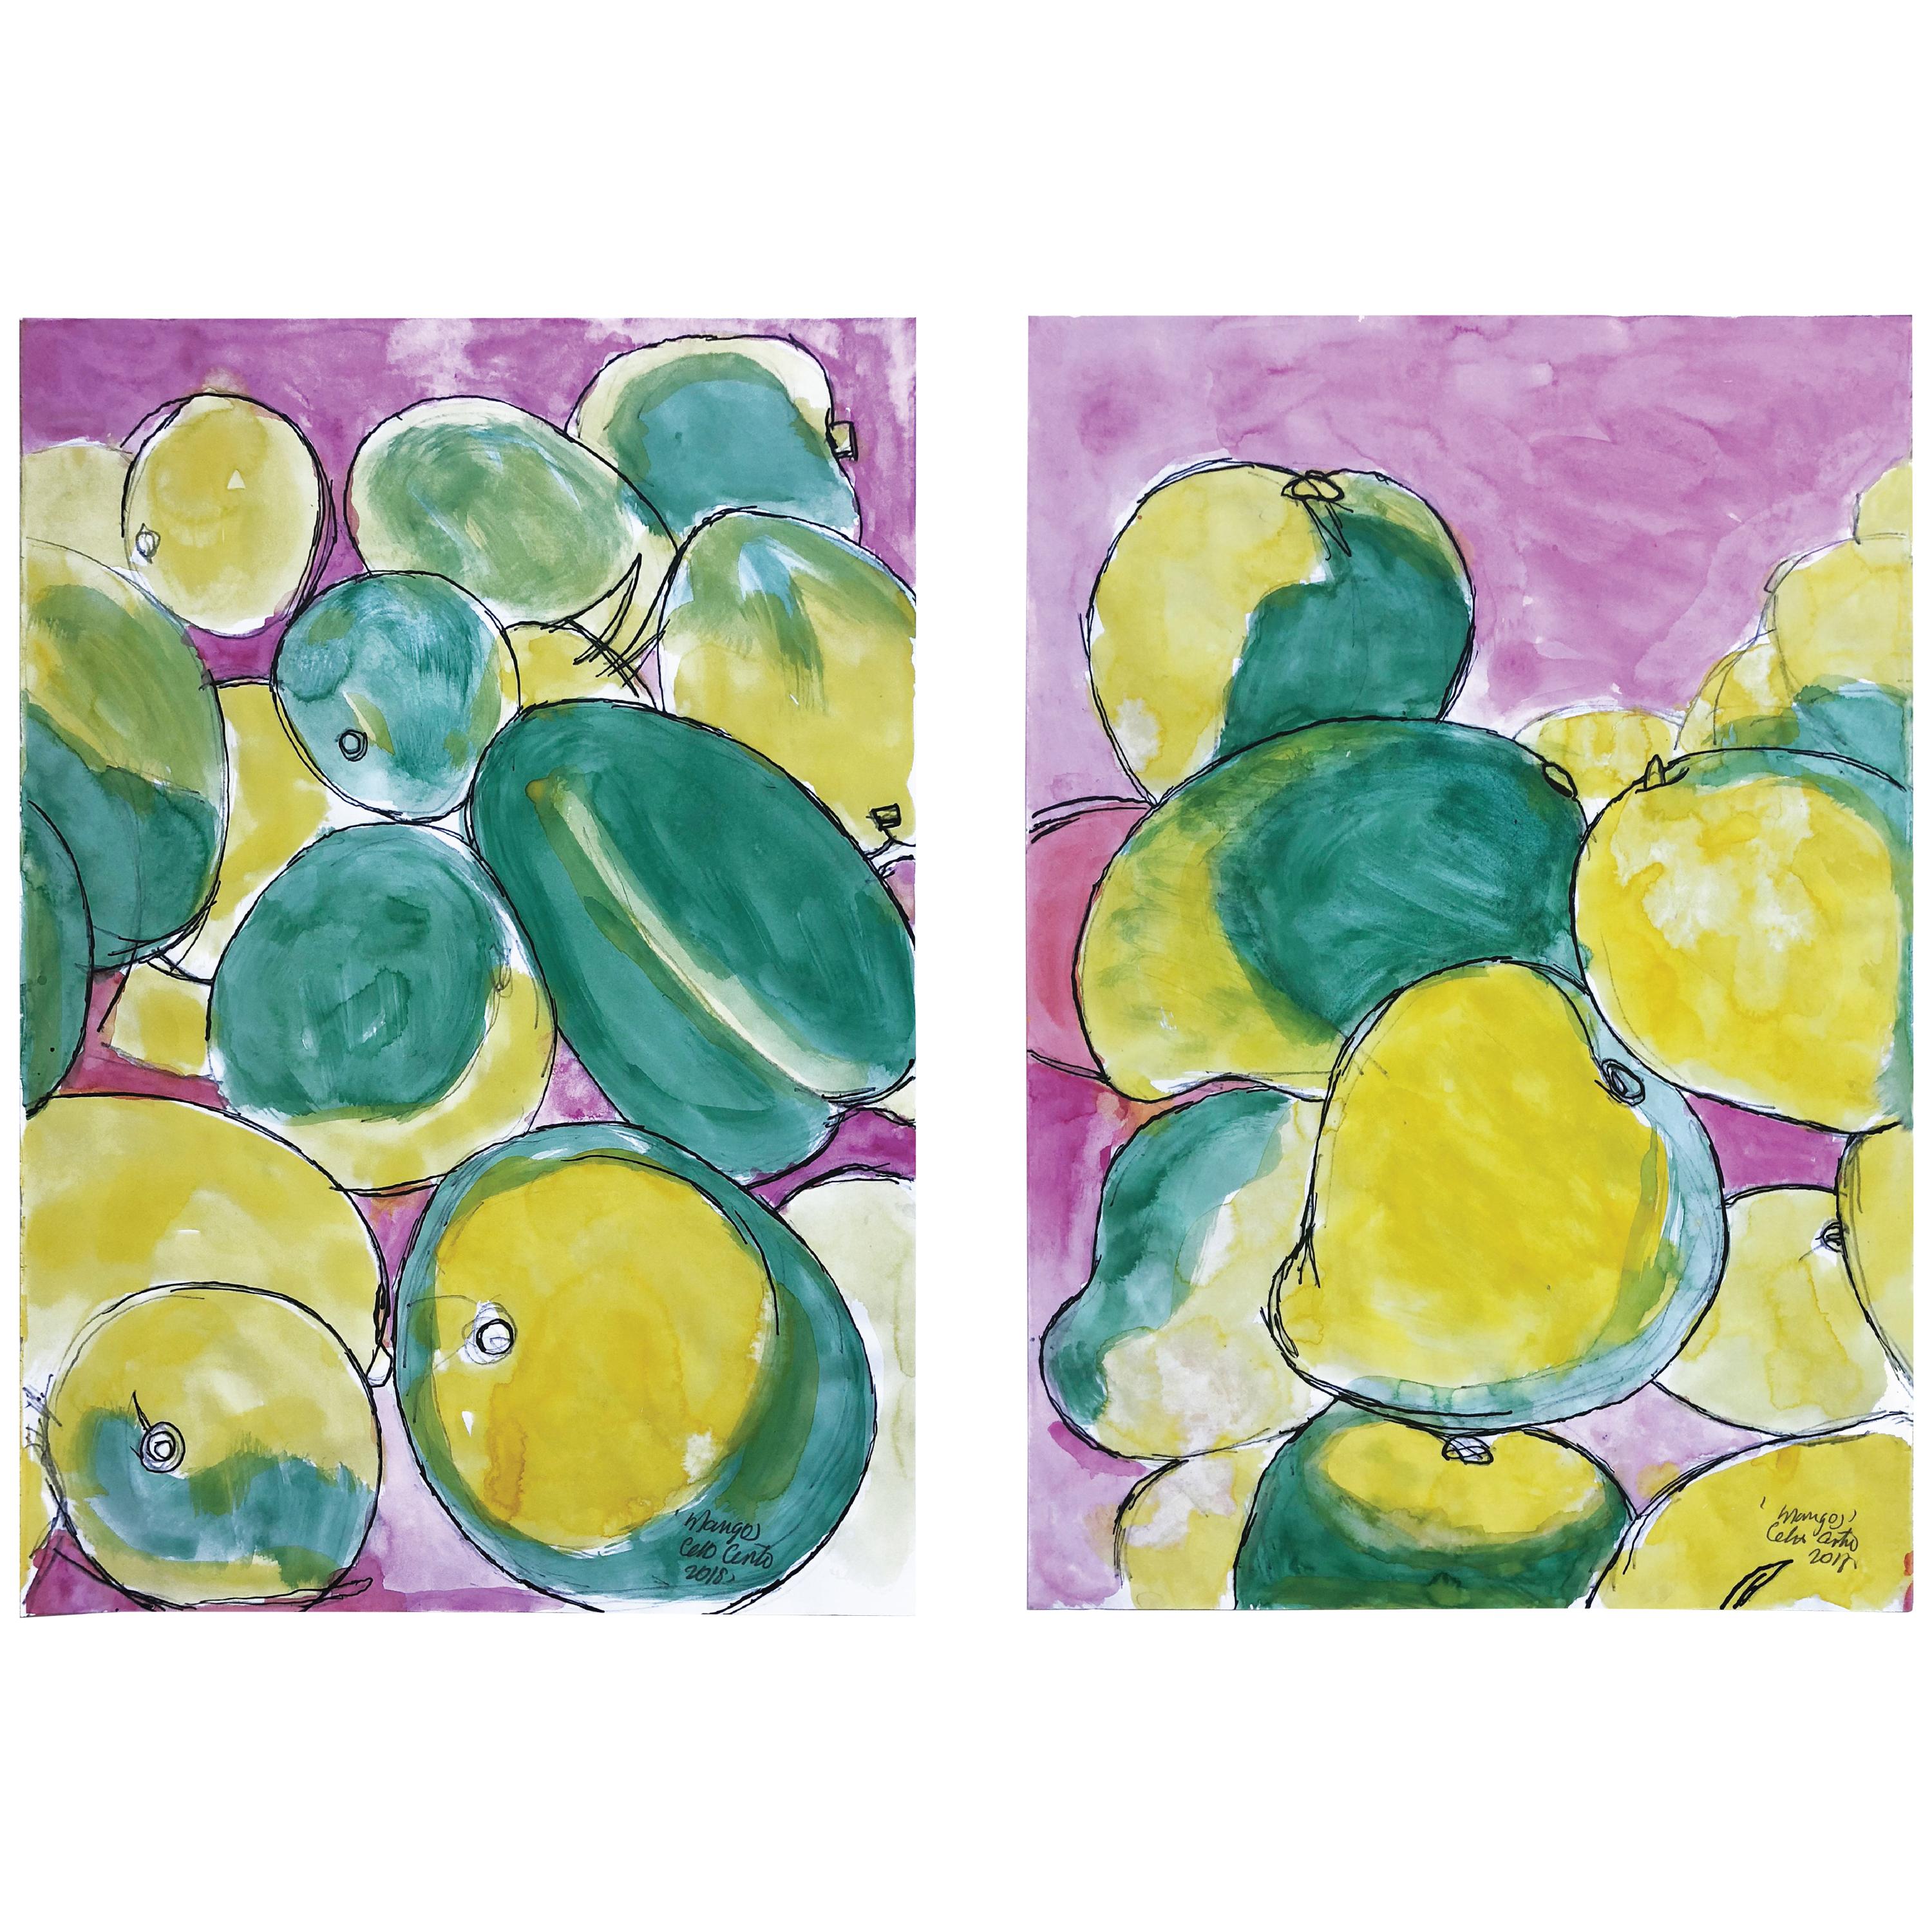 Mangos (B2), Watercolor and Ink on Archival Paper, Diptych, 2018